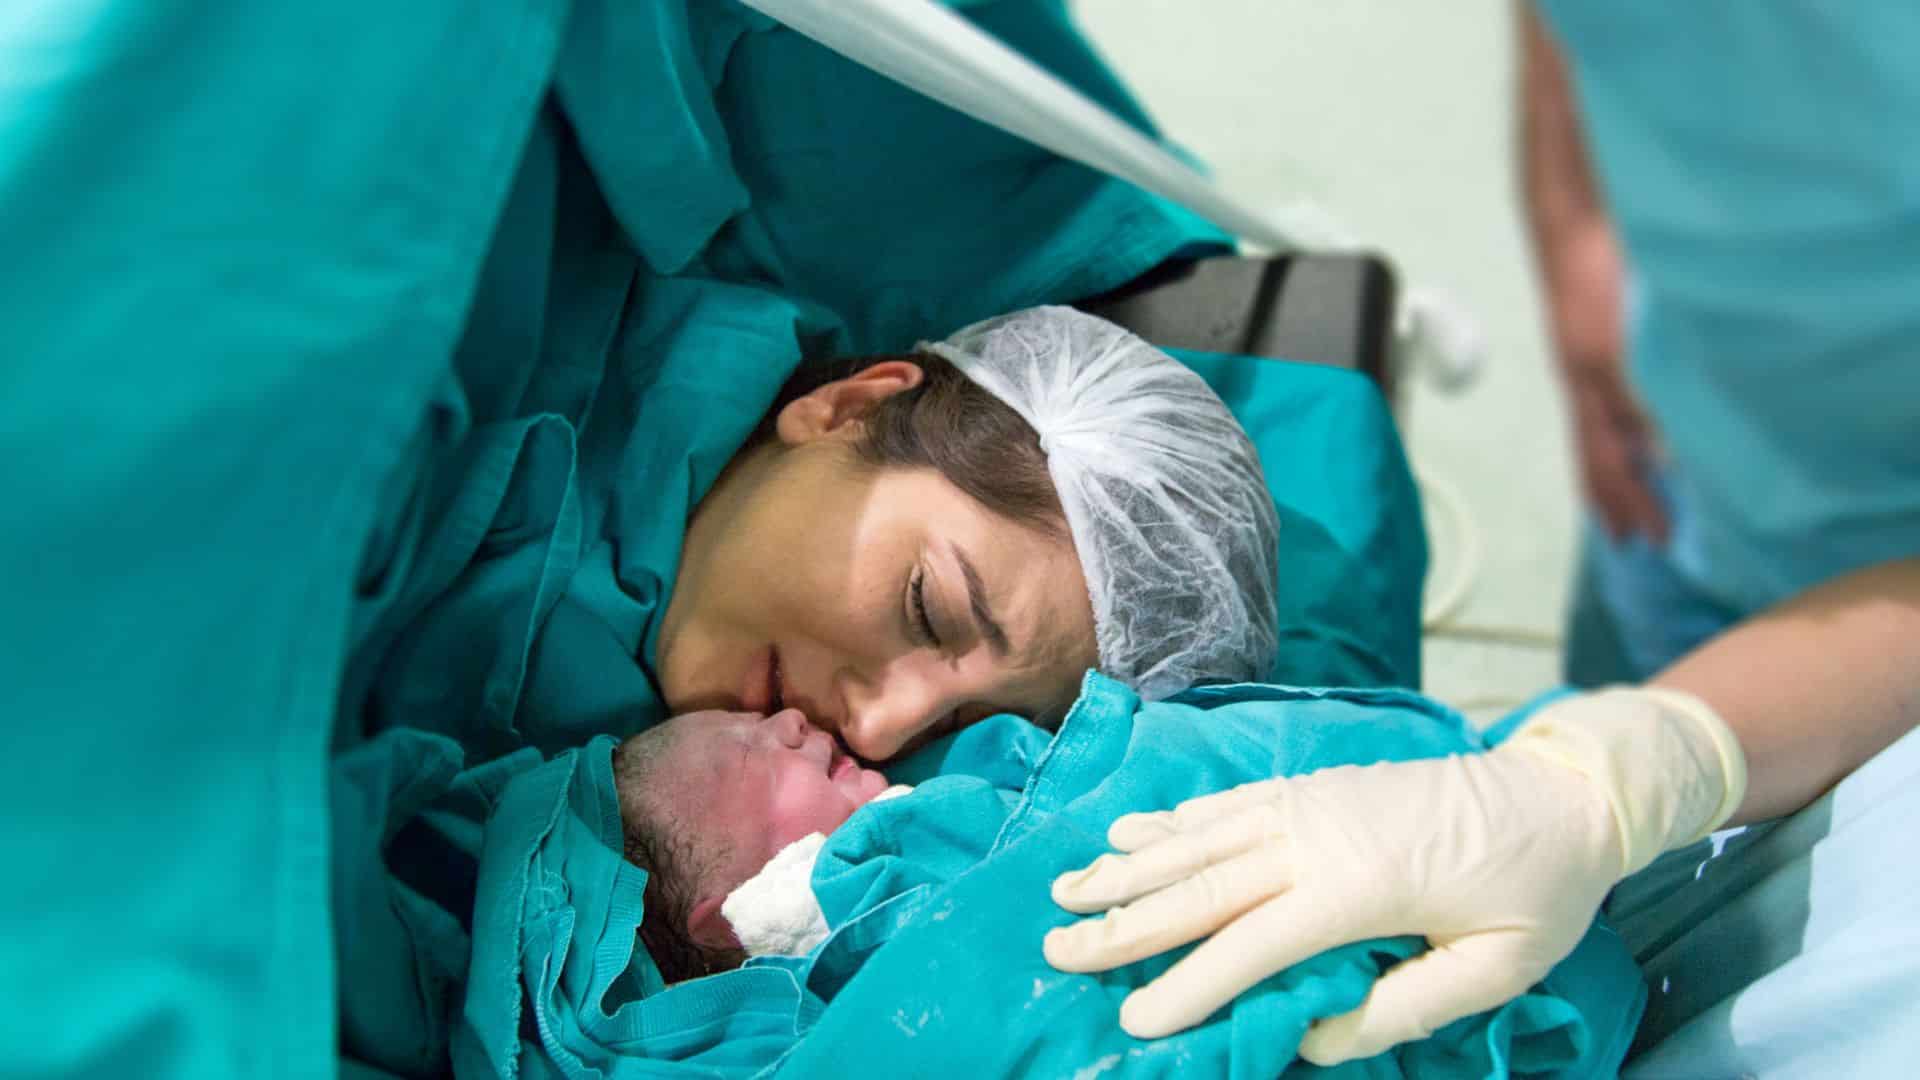 https://www.mother.ly/wp-content/uploads/2022/09/mother-embracing-newborn-baby-after-c-section-birth.jpg